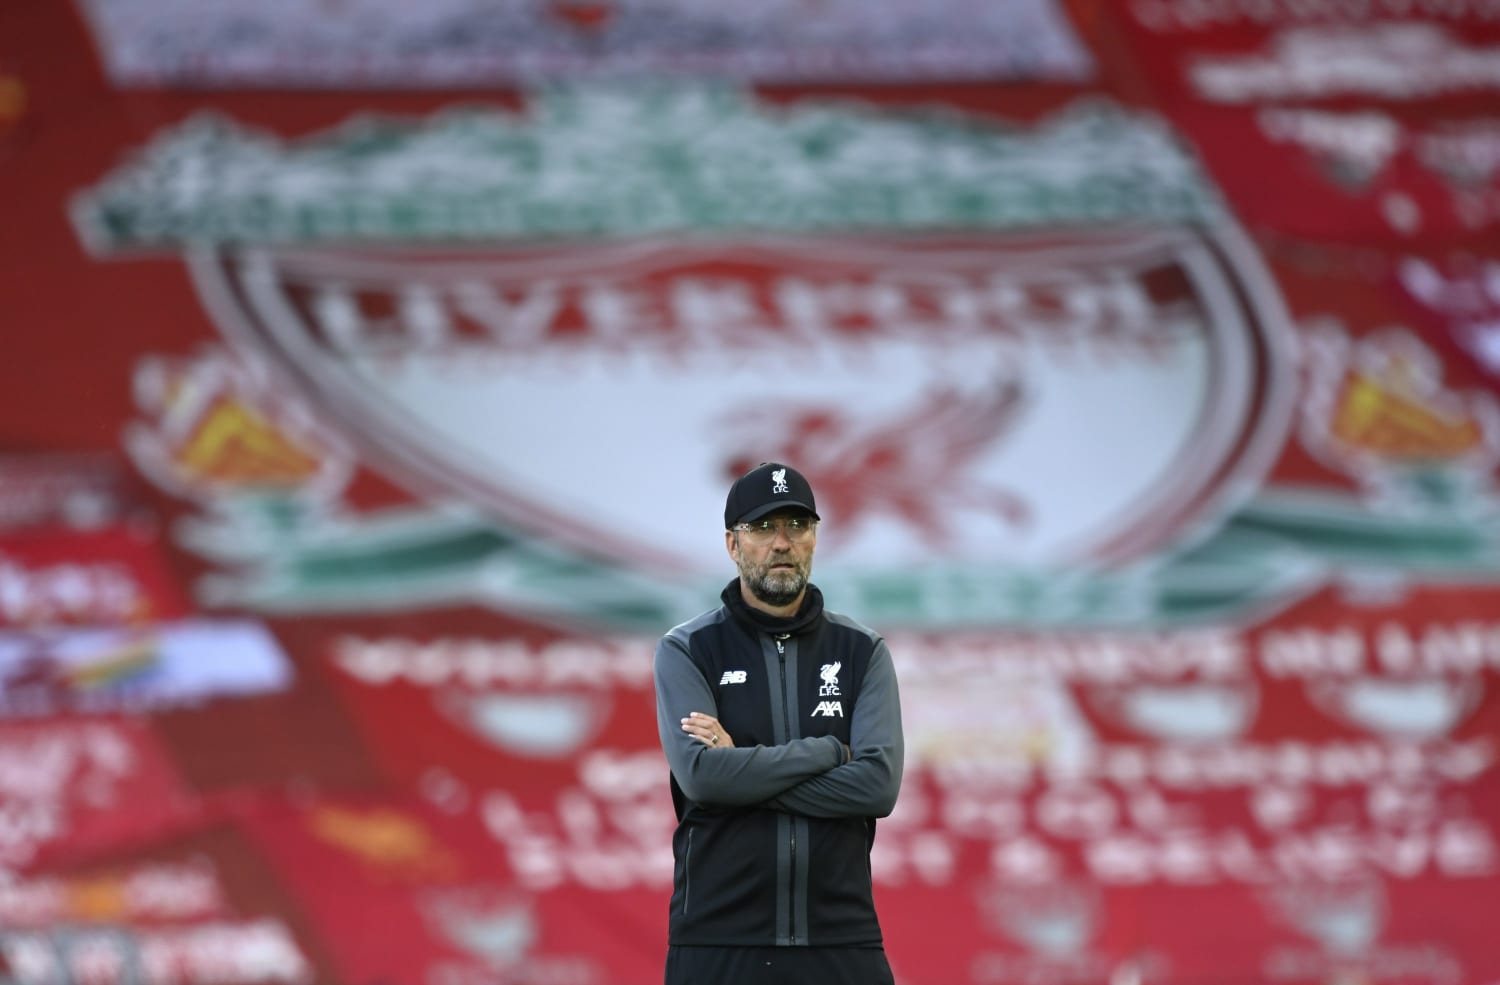 MATCHDAY: Liverpool plays dethroned champions Man City